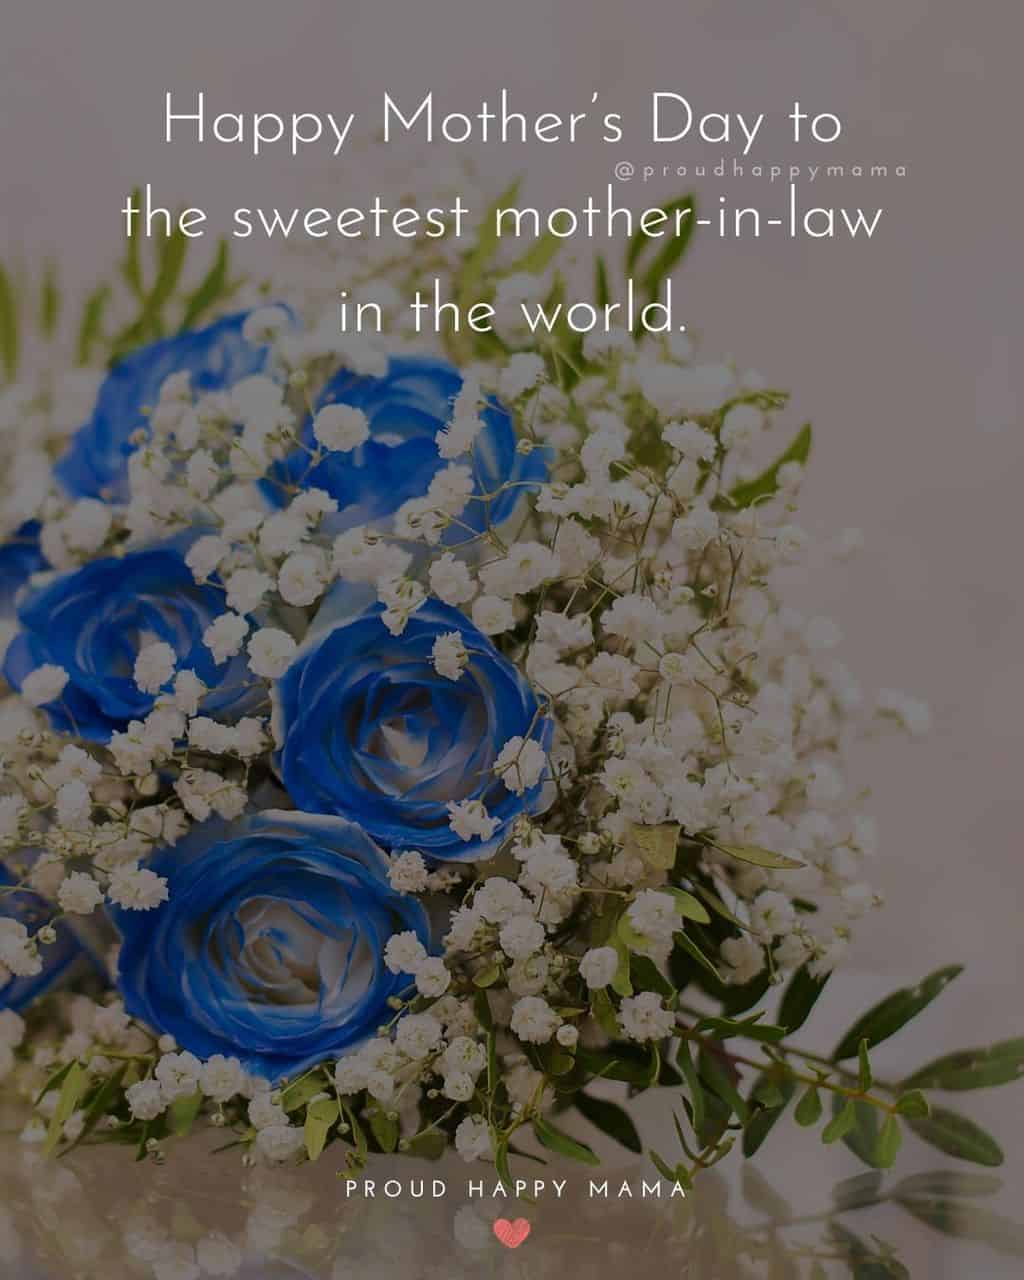 Happy Mothers Day Quotes For Mother In Law - Happy Mother’s Day to the sweetest mother in law in the world.’